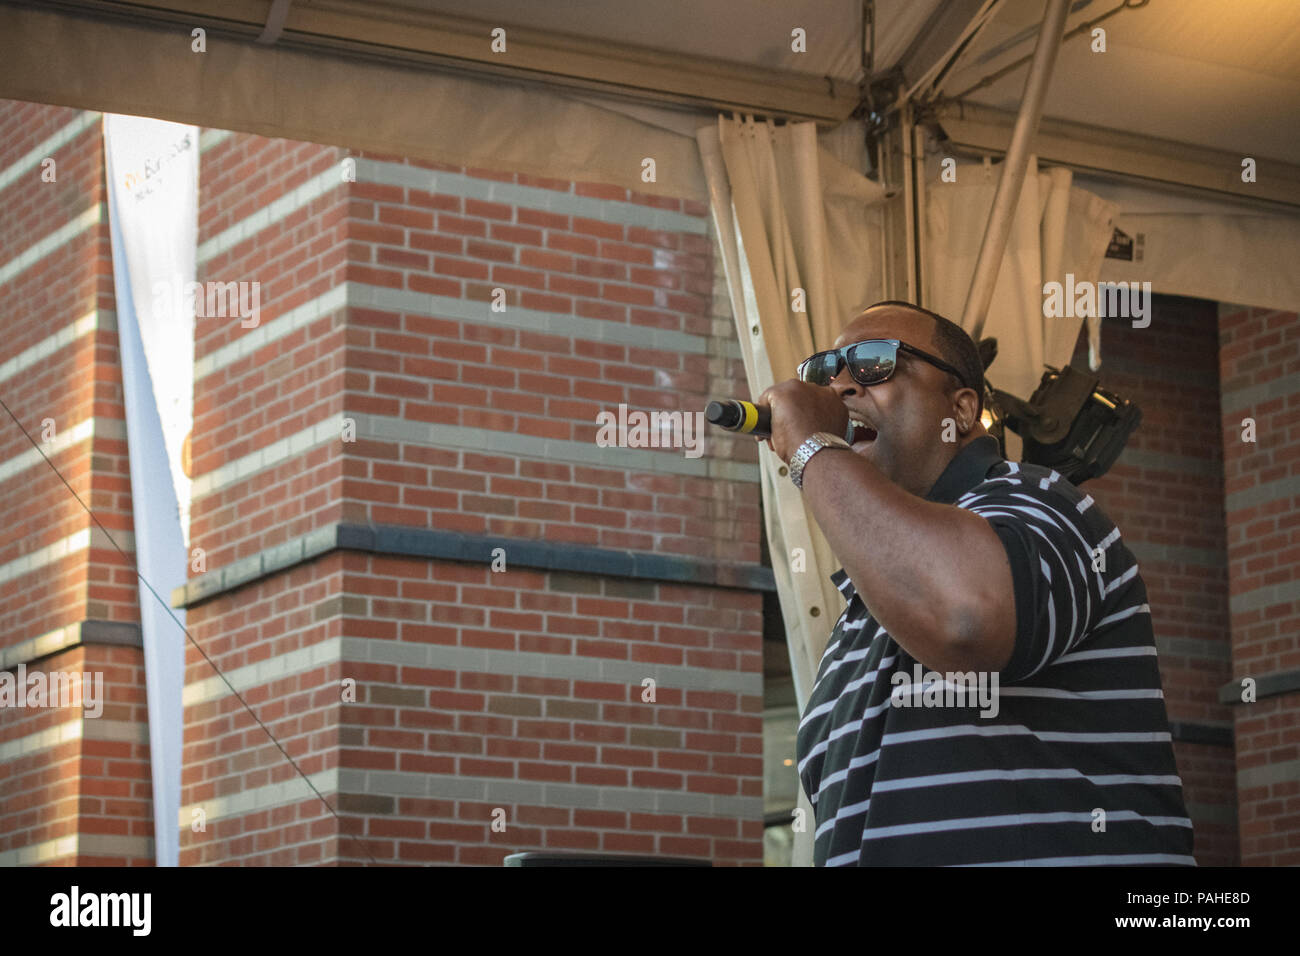 Bruse Wane along with DJ Ether opened up for EPMD on July 19,2018 at the NJ PAC Stock Photo